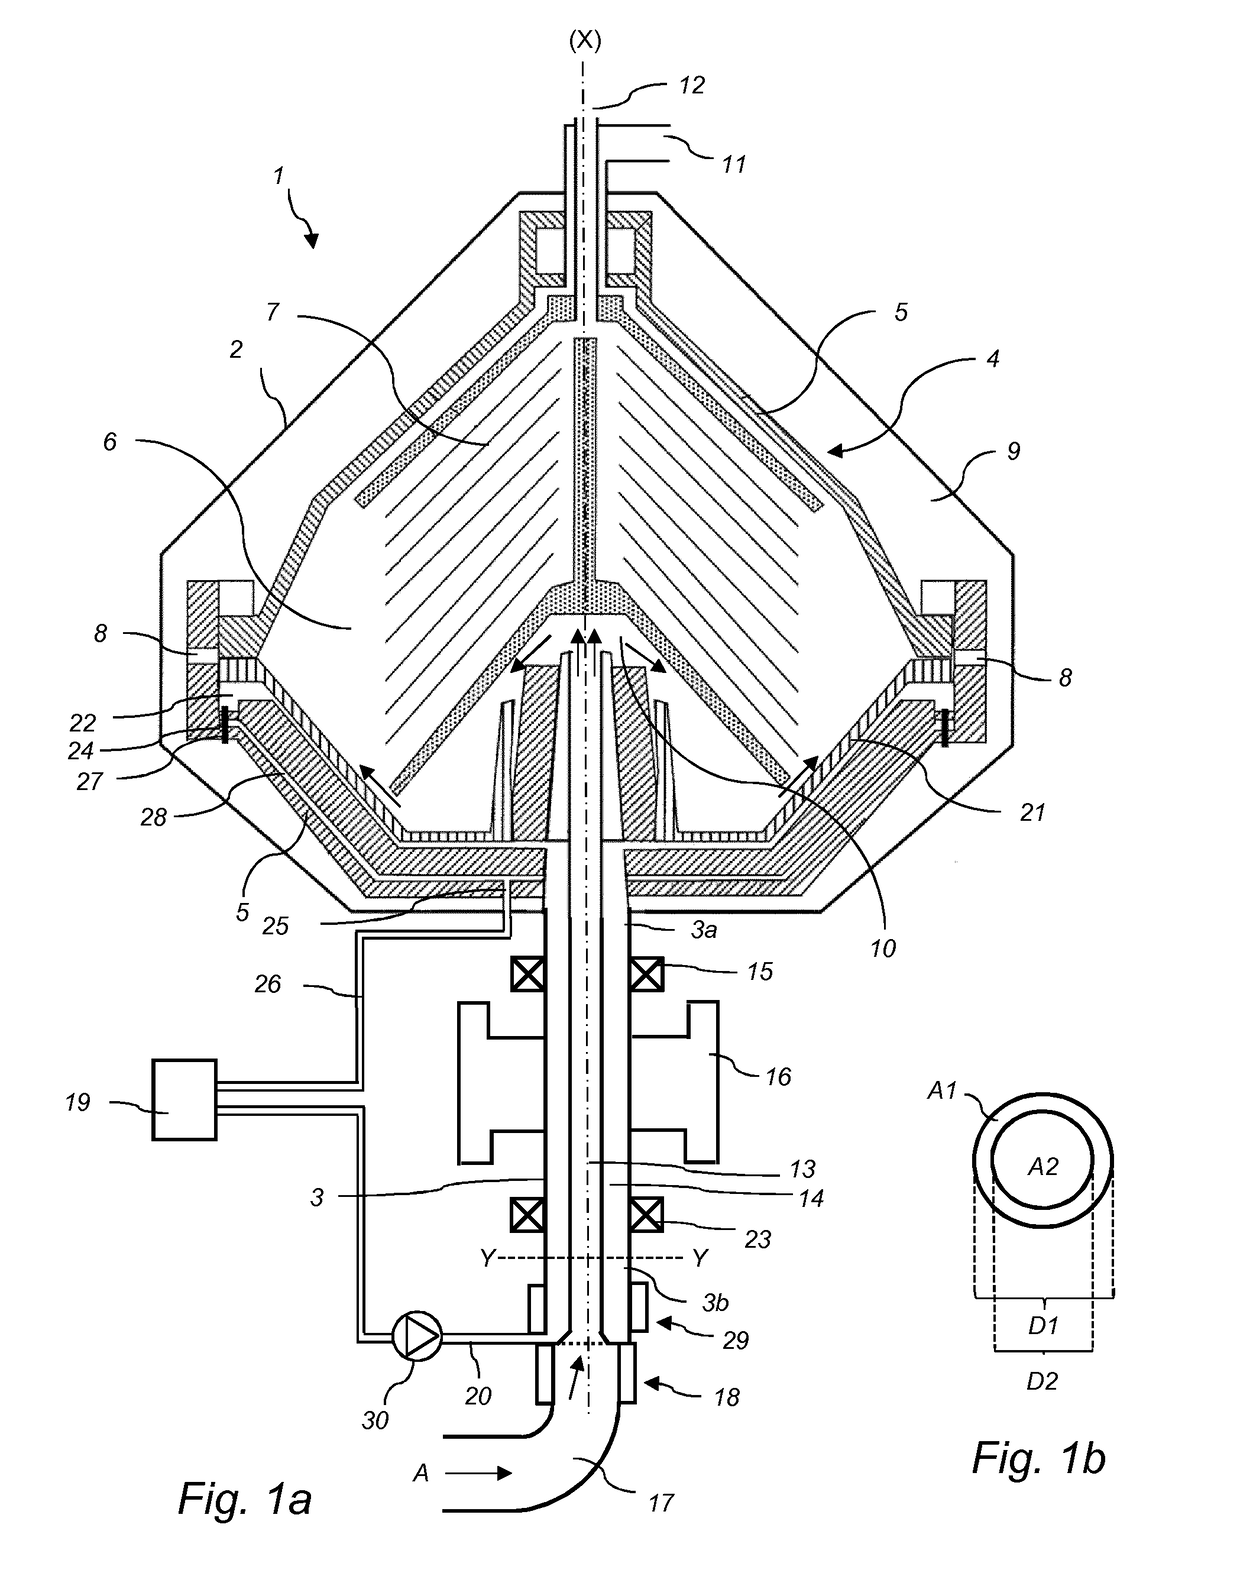 Centrifugal separator having an intermittent discharge system